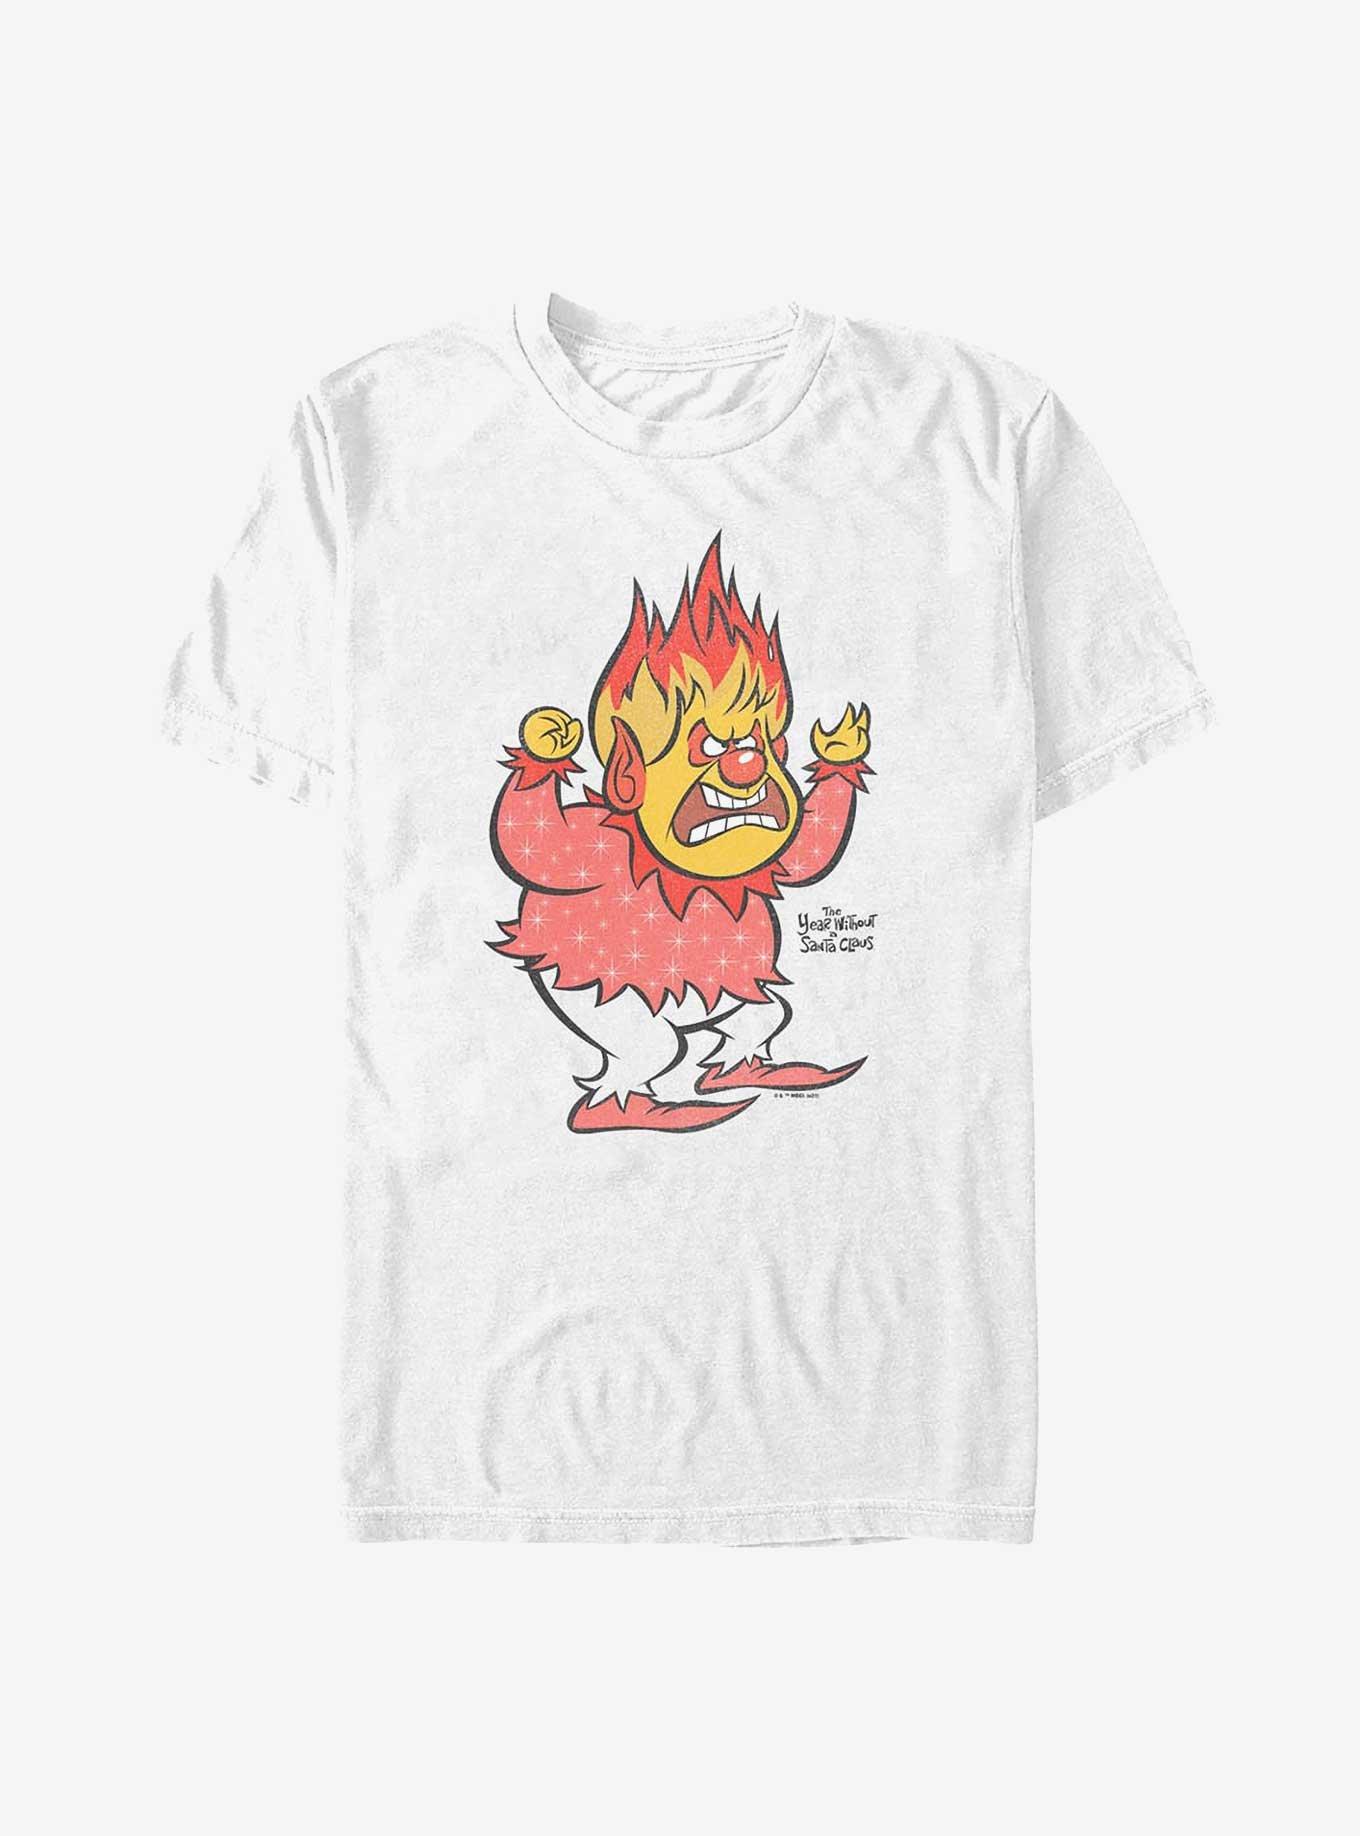 The Year Without a Santa Claus Vintage Heat Miser Big & Tall T-Shirt, WHITE, hi-res